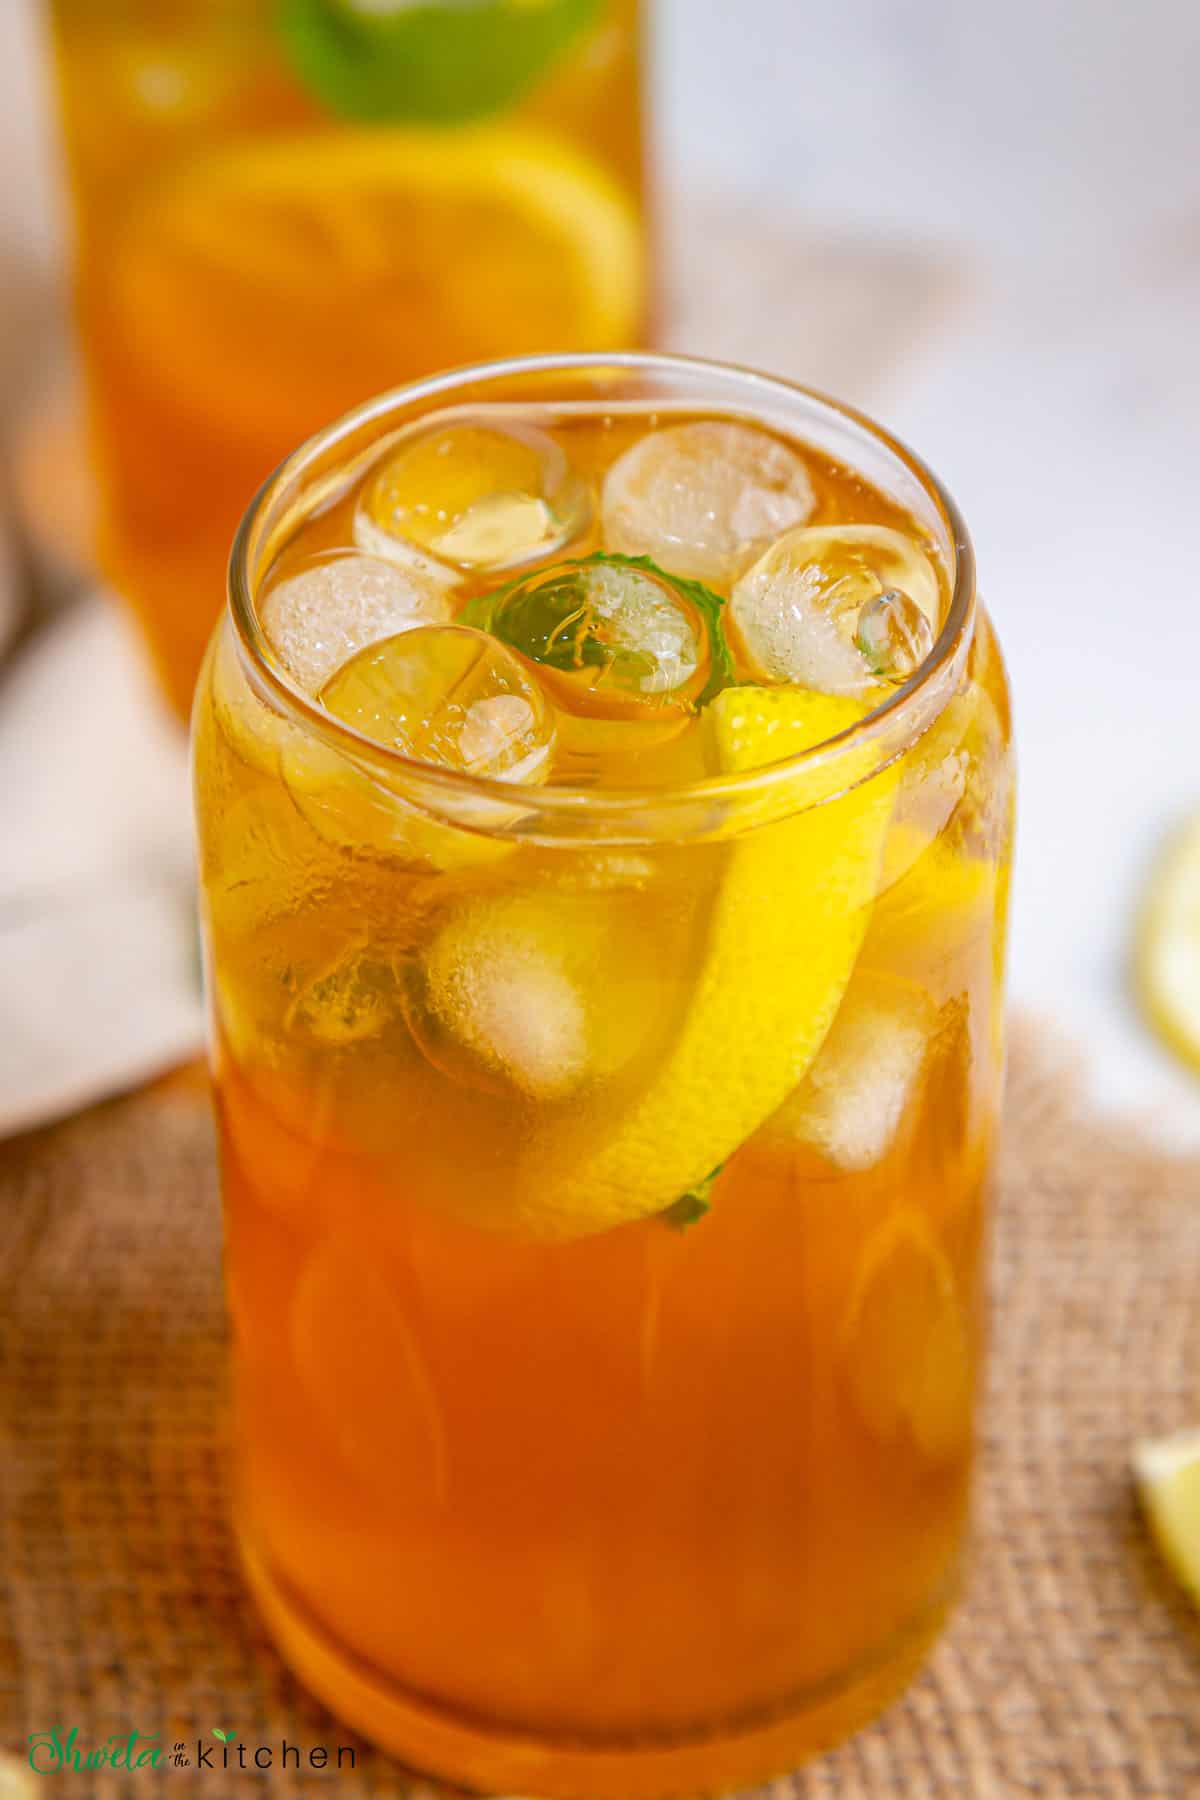 Refreshing lemon iced tea served in a tall glass with ice cubes and lemon slices